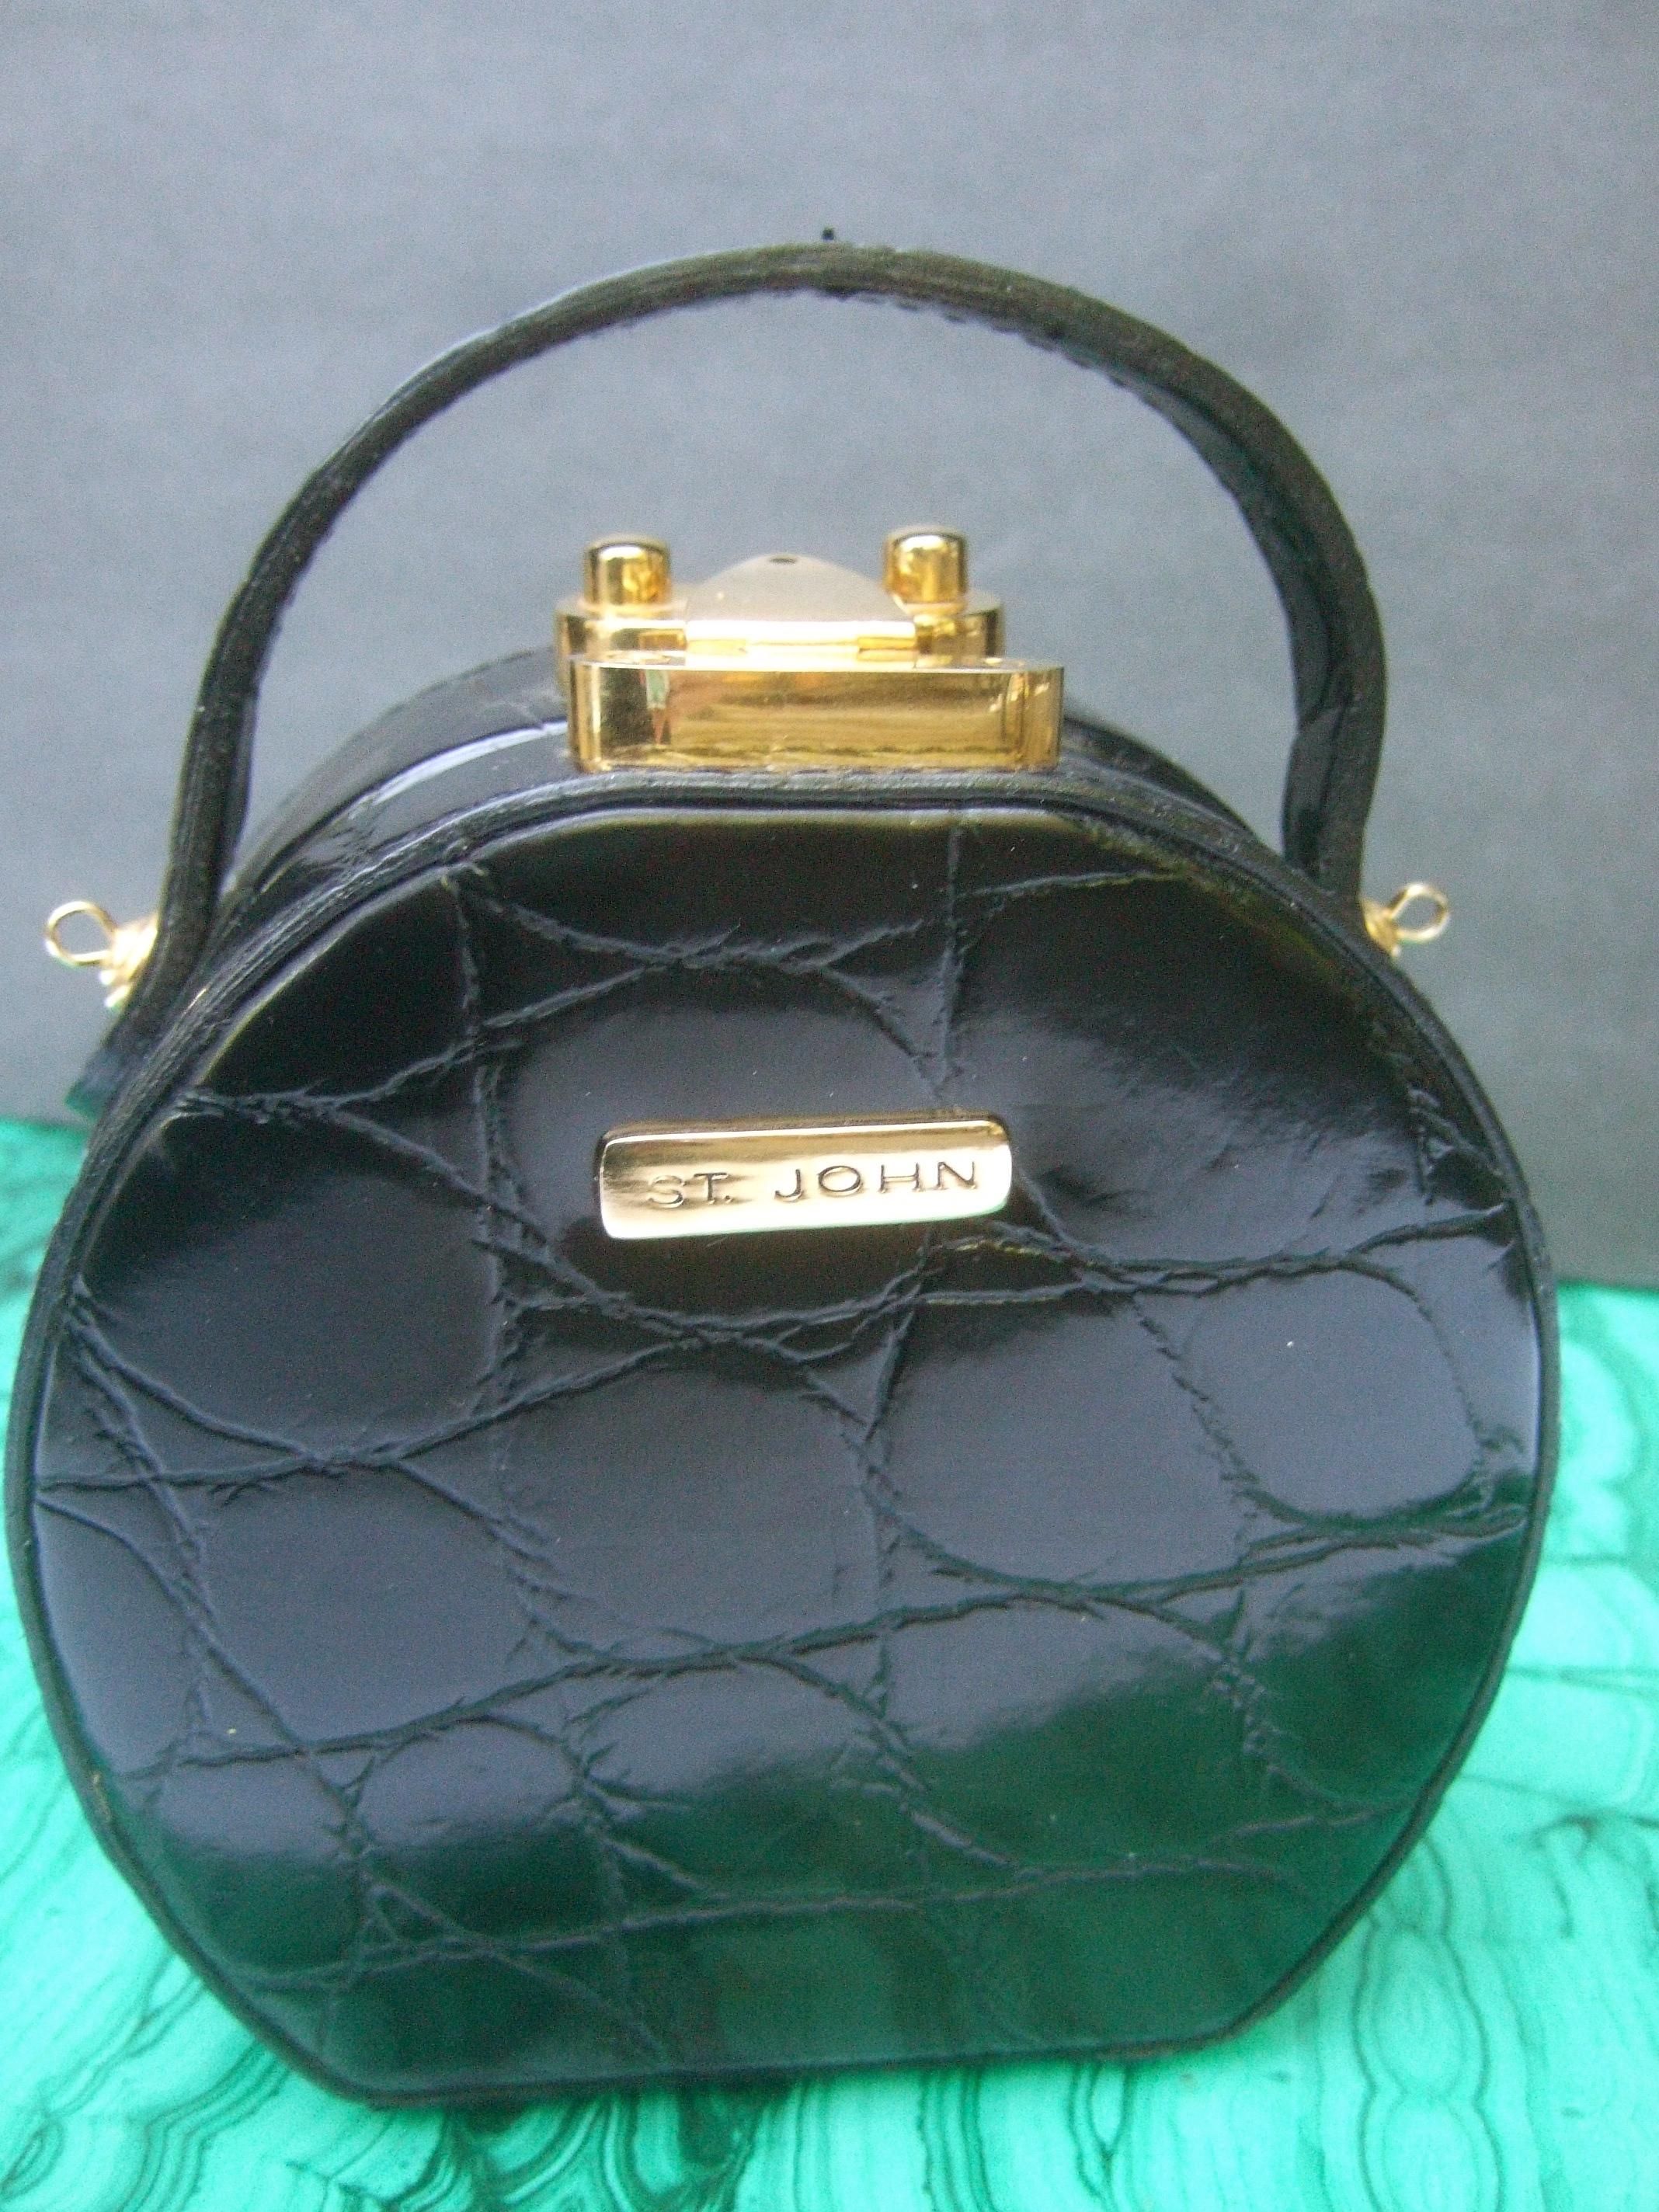 St John embossed vinyl diminutive size handbag - shoulder bag c 1990 
The stylish compact size rounded purse is covered with embossed patent 
black vinyl that emulates reptile skin 

Designed with a sleek gilt metal latch clasp mechanism. Adorned